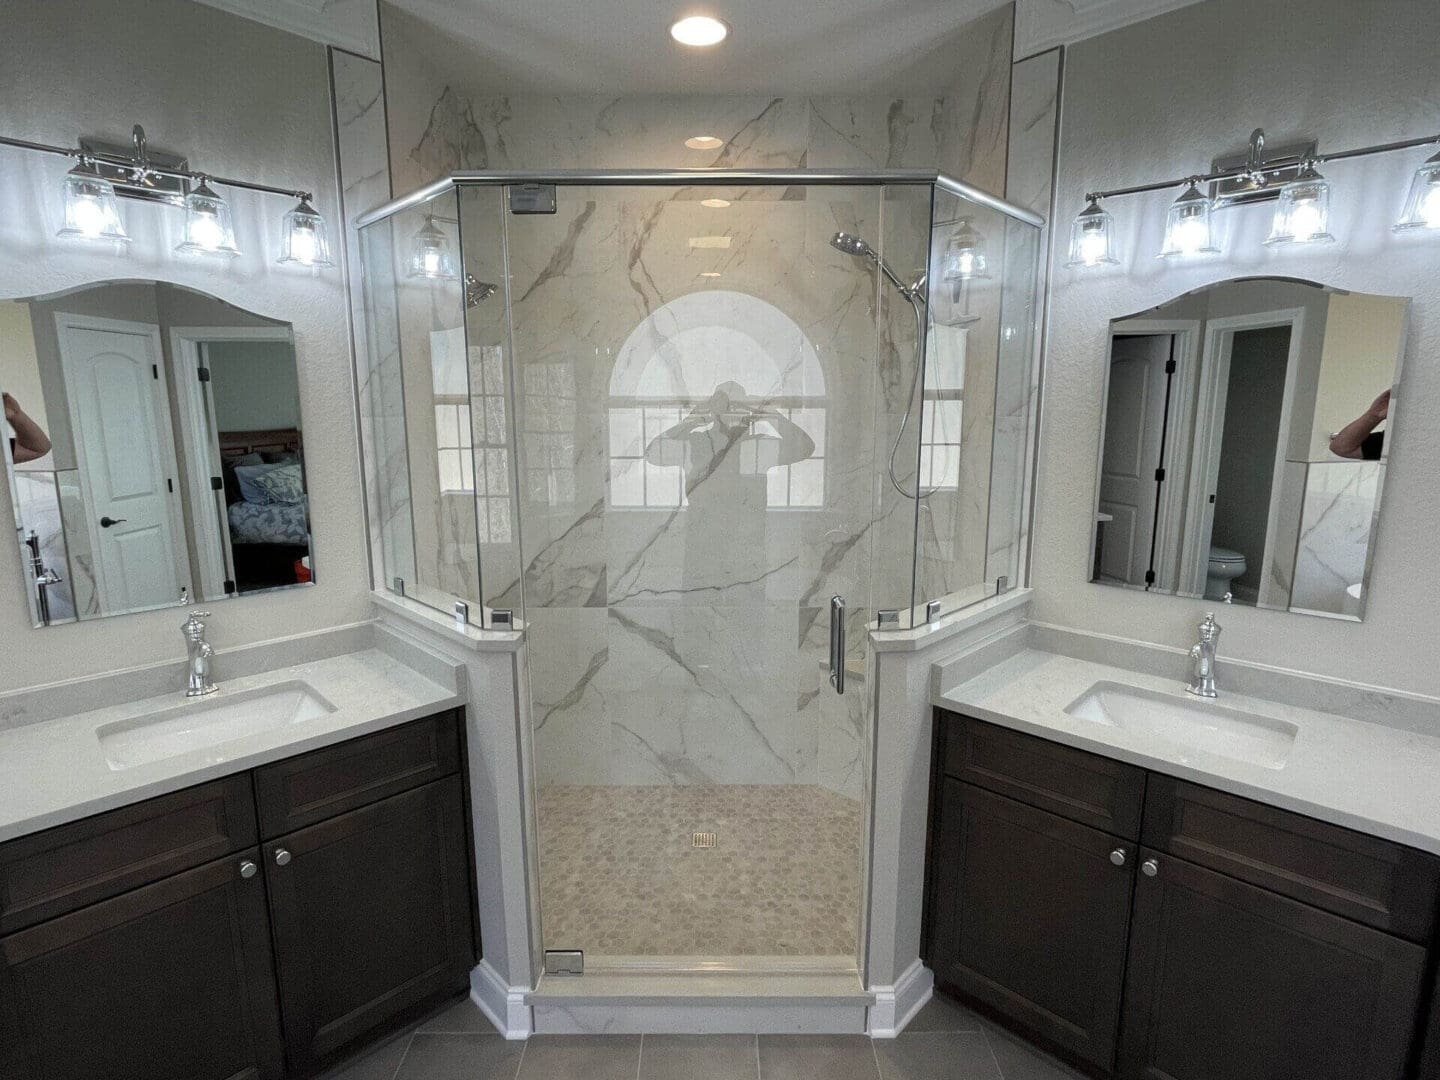 A bathroom with two sinks and a large shower.